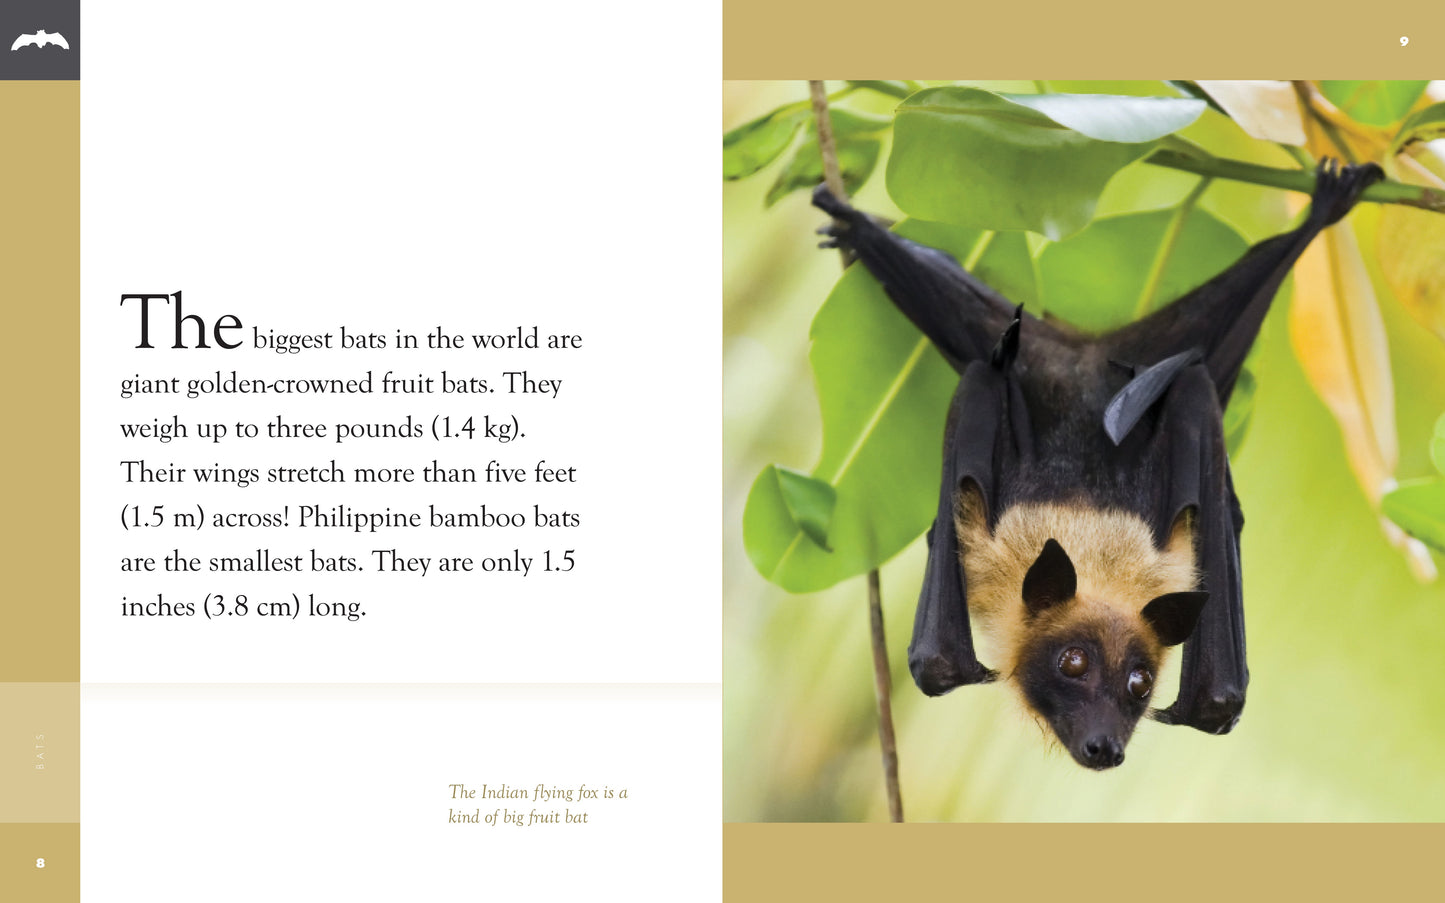 Amazing Animals - Classic Edition: Bats by The Creative Company Shop